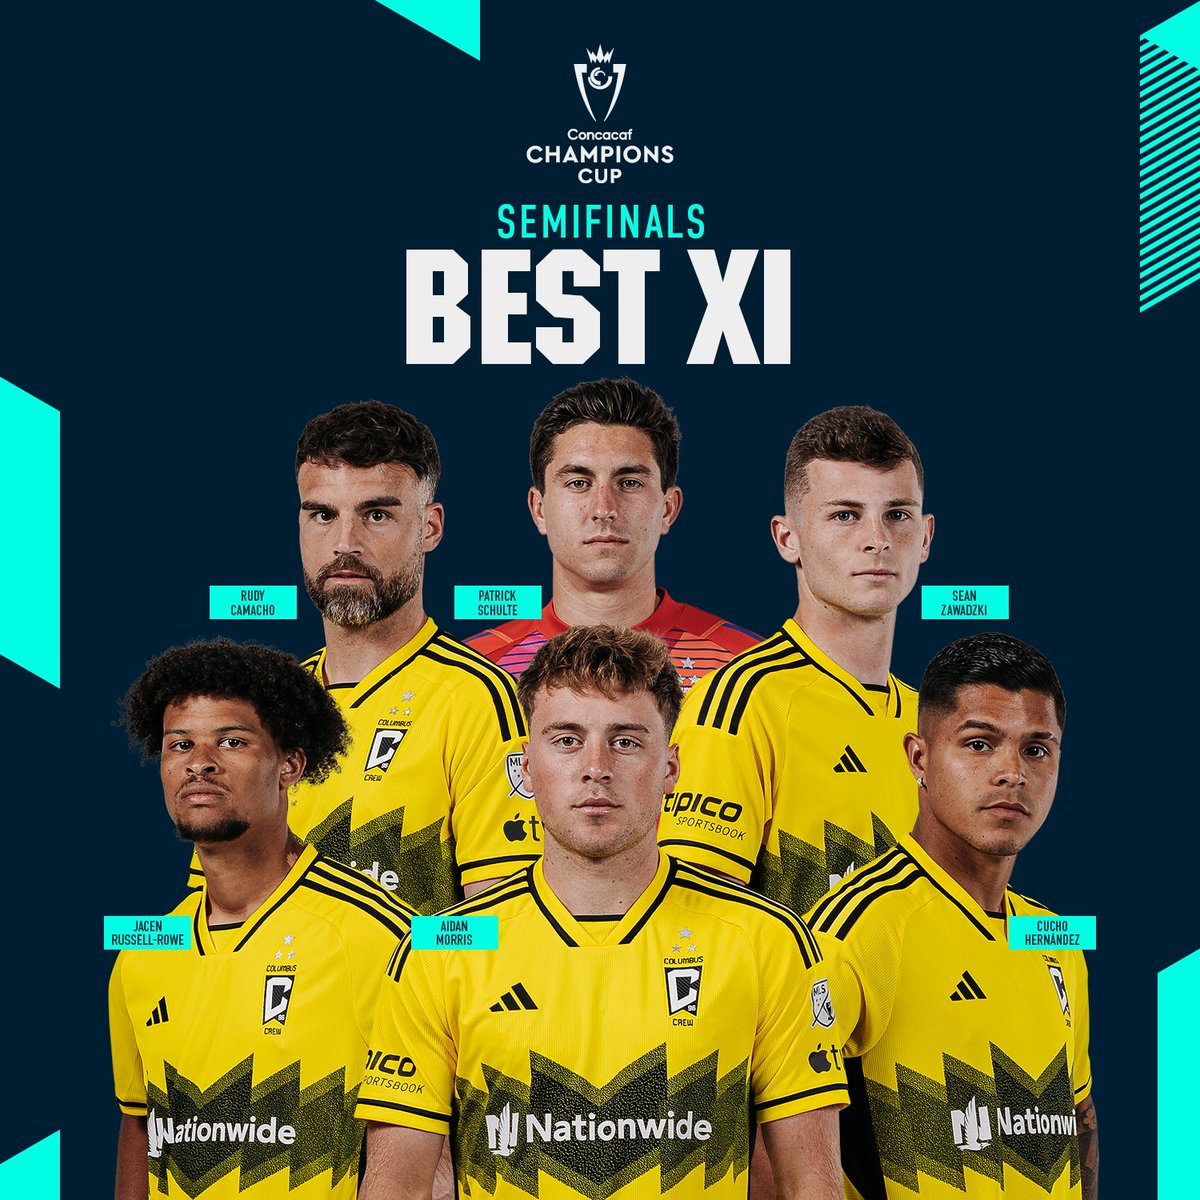 Unrelenting & Undeniable ✨ Jacen Russell-Rowe, Aidan Morris, Cucho, Rudy Camacho, Patrick Schulte and Sean Zawadzki have all been named to @TheChampions Semifinals Best XI.